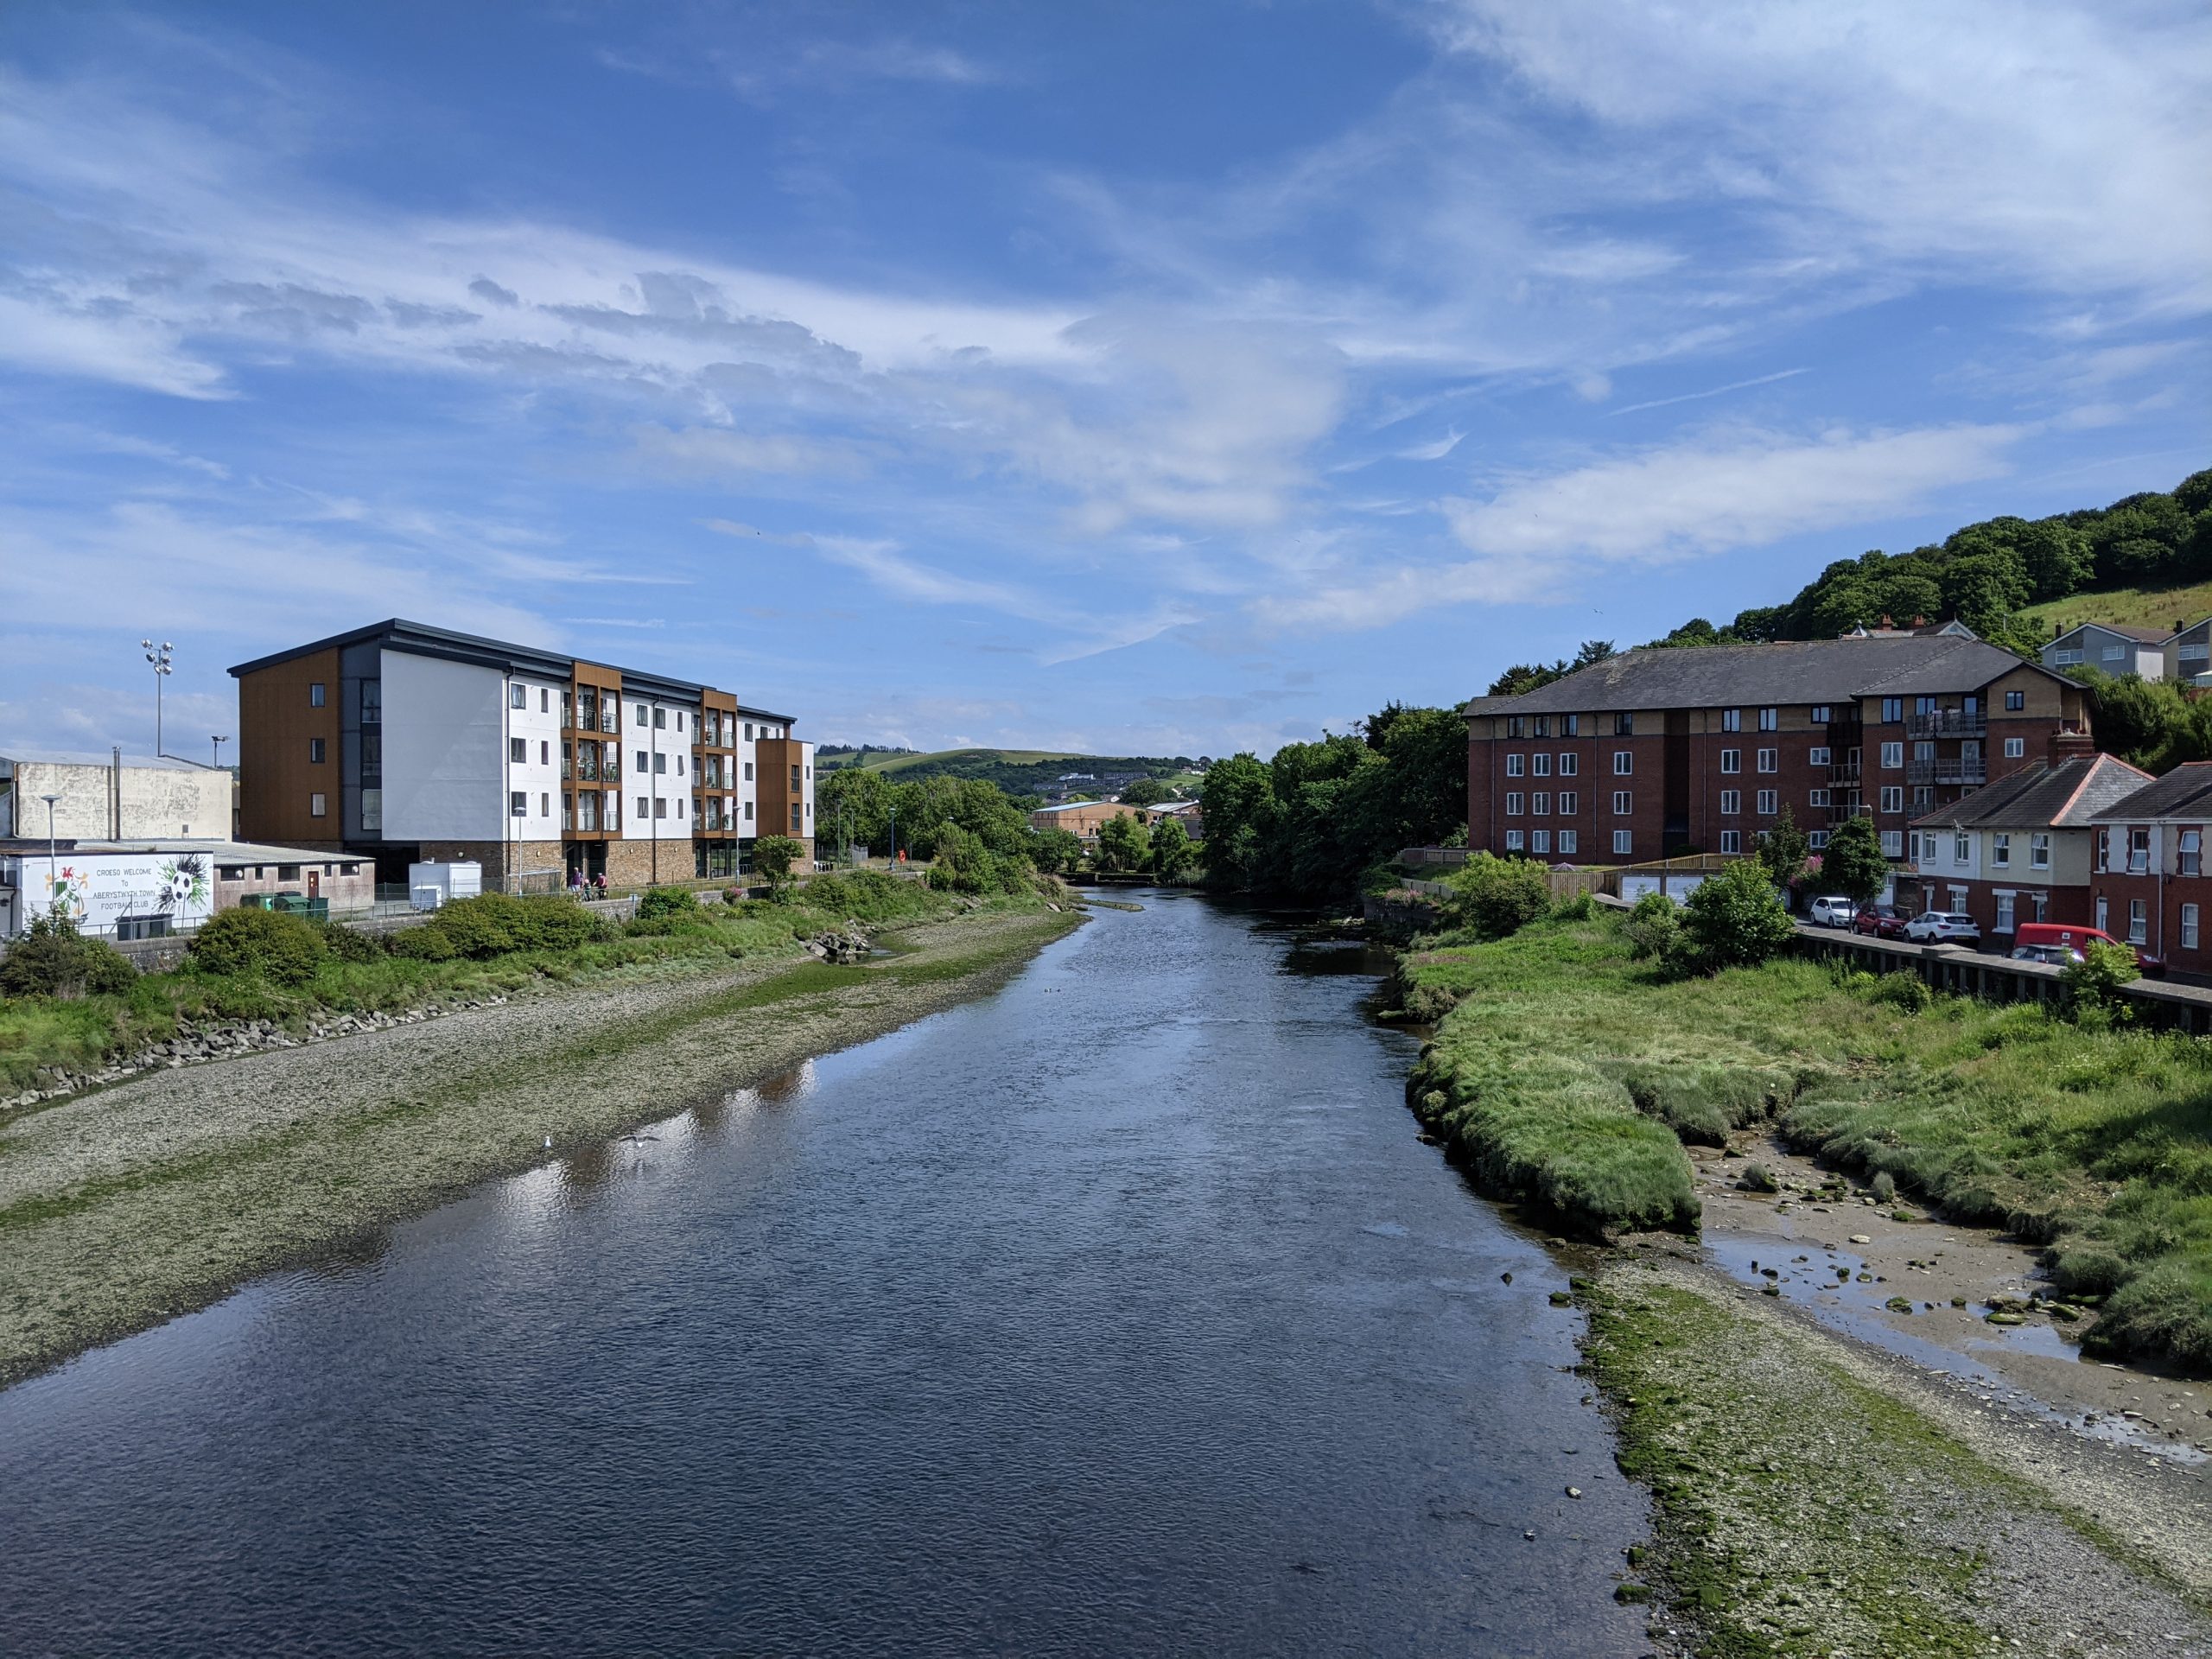 Wide river running through town with green space either side, modern buildings either side and a slightly cloudy blue sky.